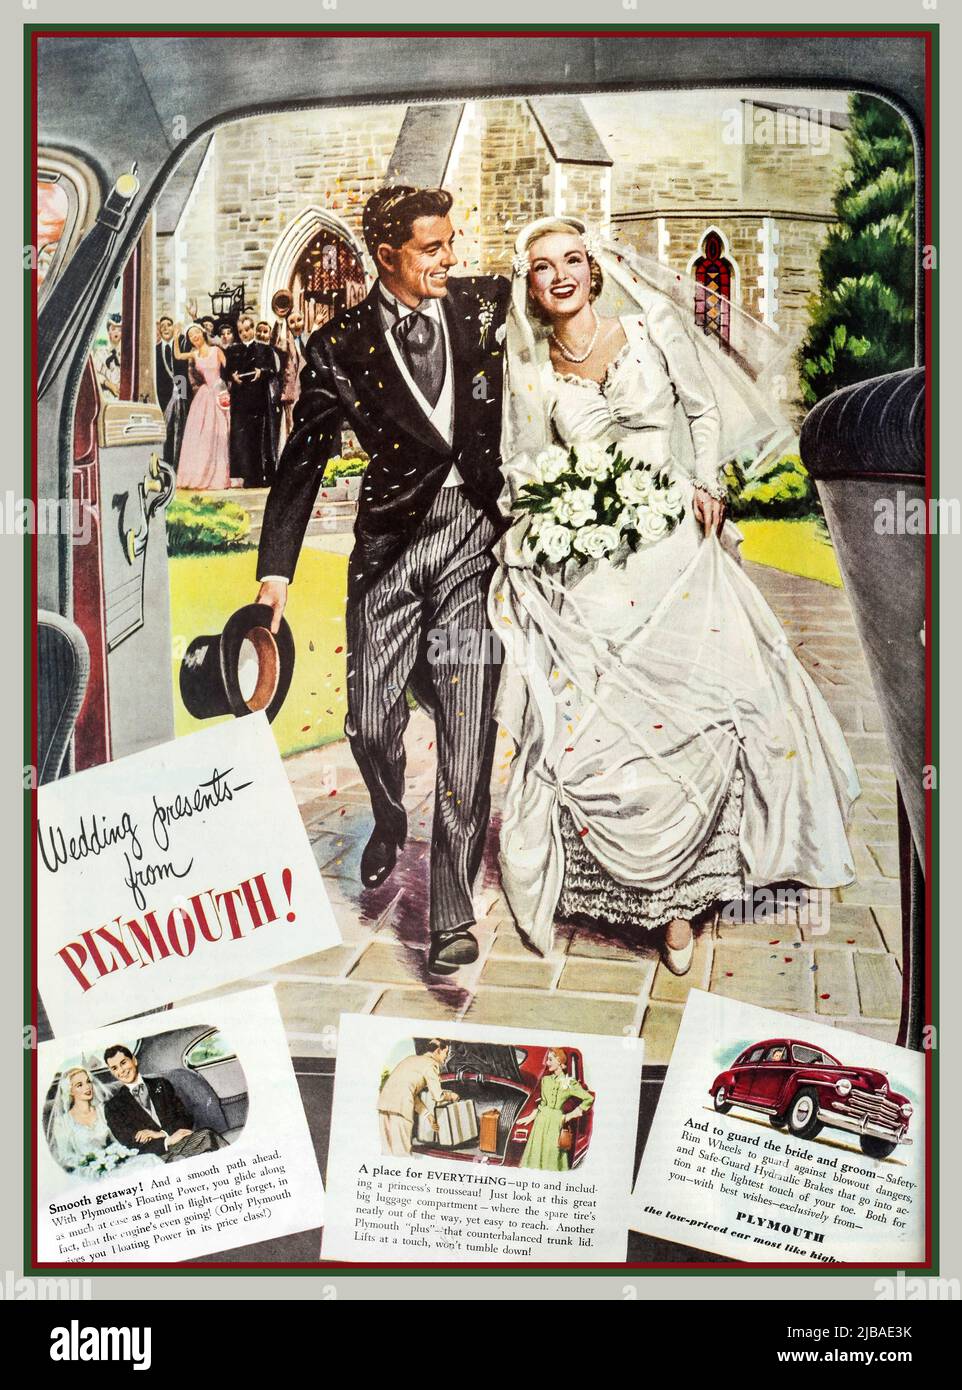 PLYMOUTH American car press advertisement. 1948 Post war traditional wedding with 'Wedding presents from Plymouth', 1948 Car press advertisement featuring recenly married couple and presents from Plymouth ad line 'Ladies Home Journal' press advertisement Illustration America USA 1940s Stock Photo